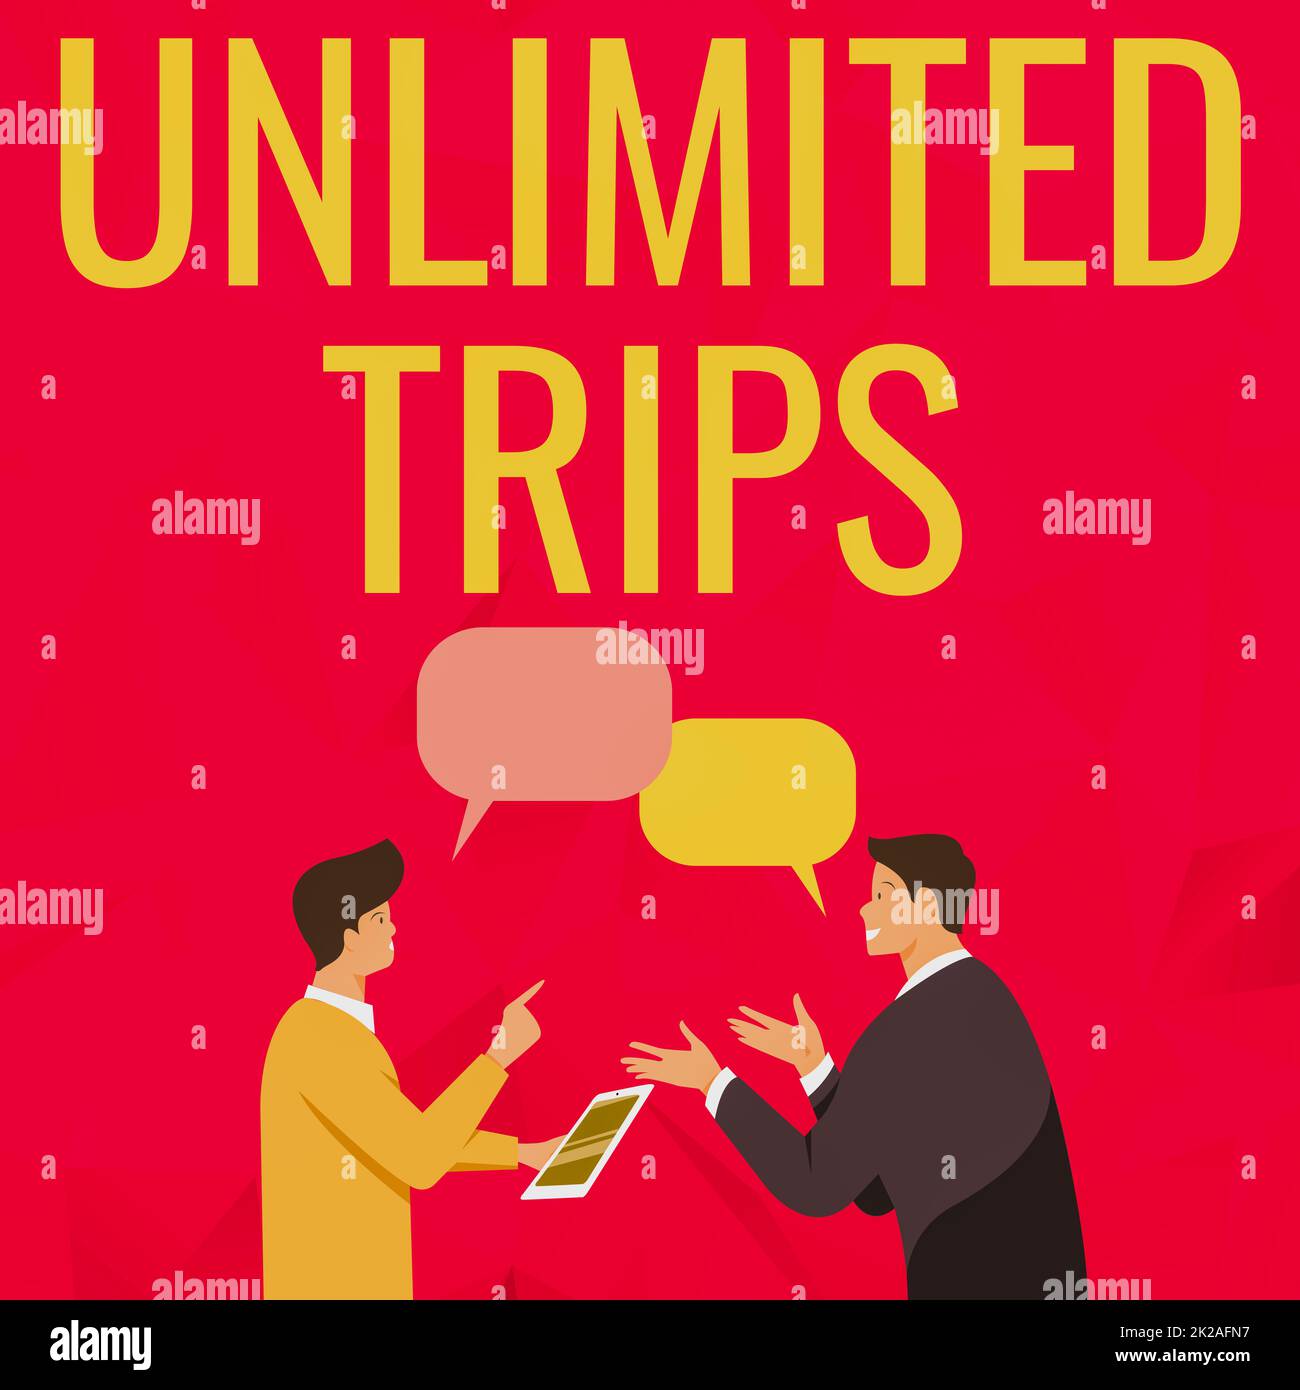 Conceptual display Unlimited Trips. Internet Concept several journey or excursion especially for pleasure Two Men Colleagues Standing Sharing Thoughts Together With Speech Bubbles Stock Photo